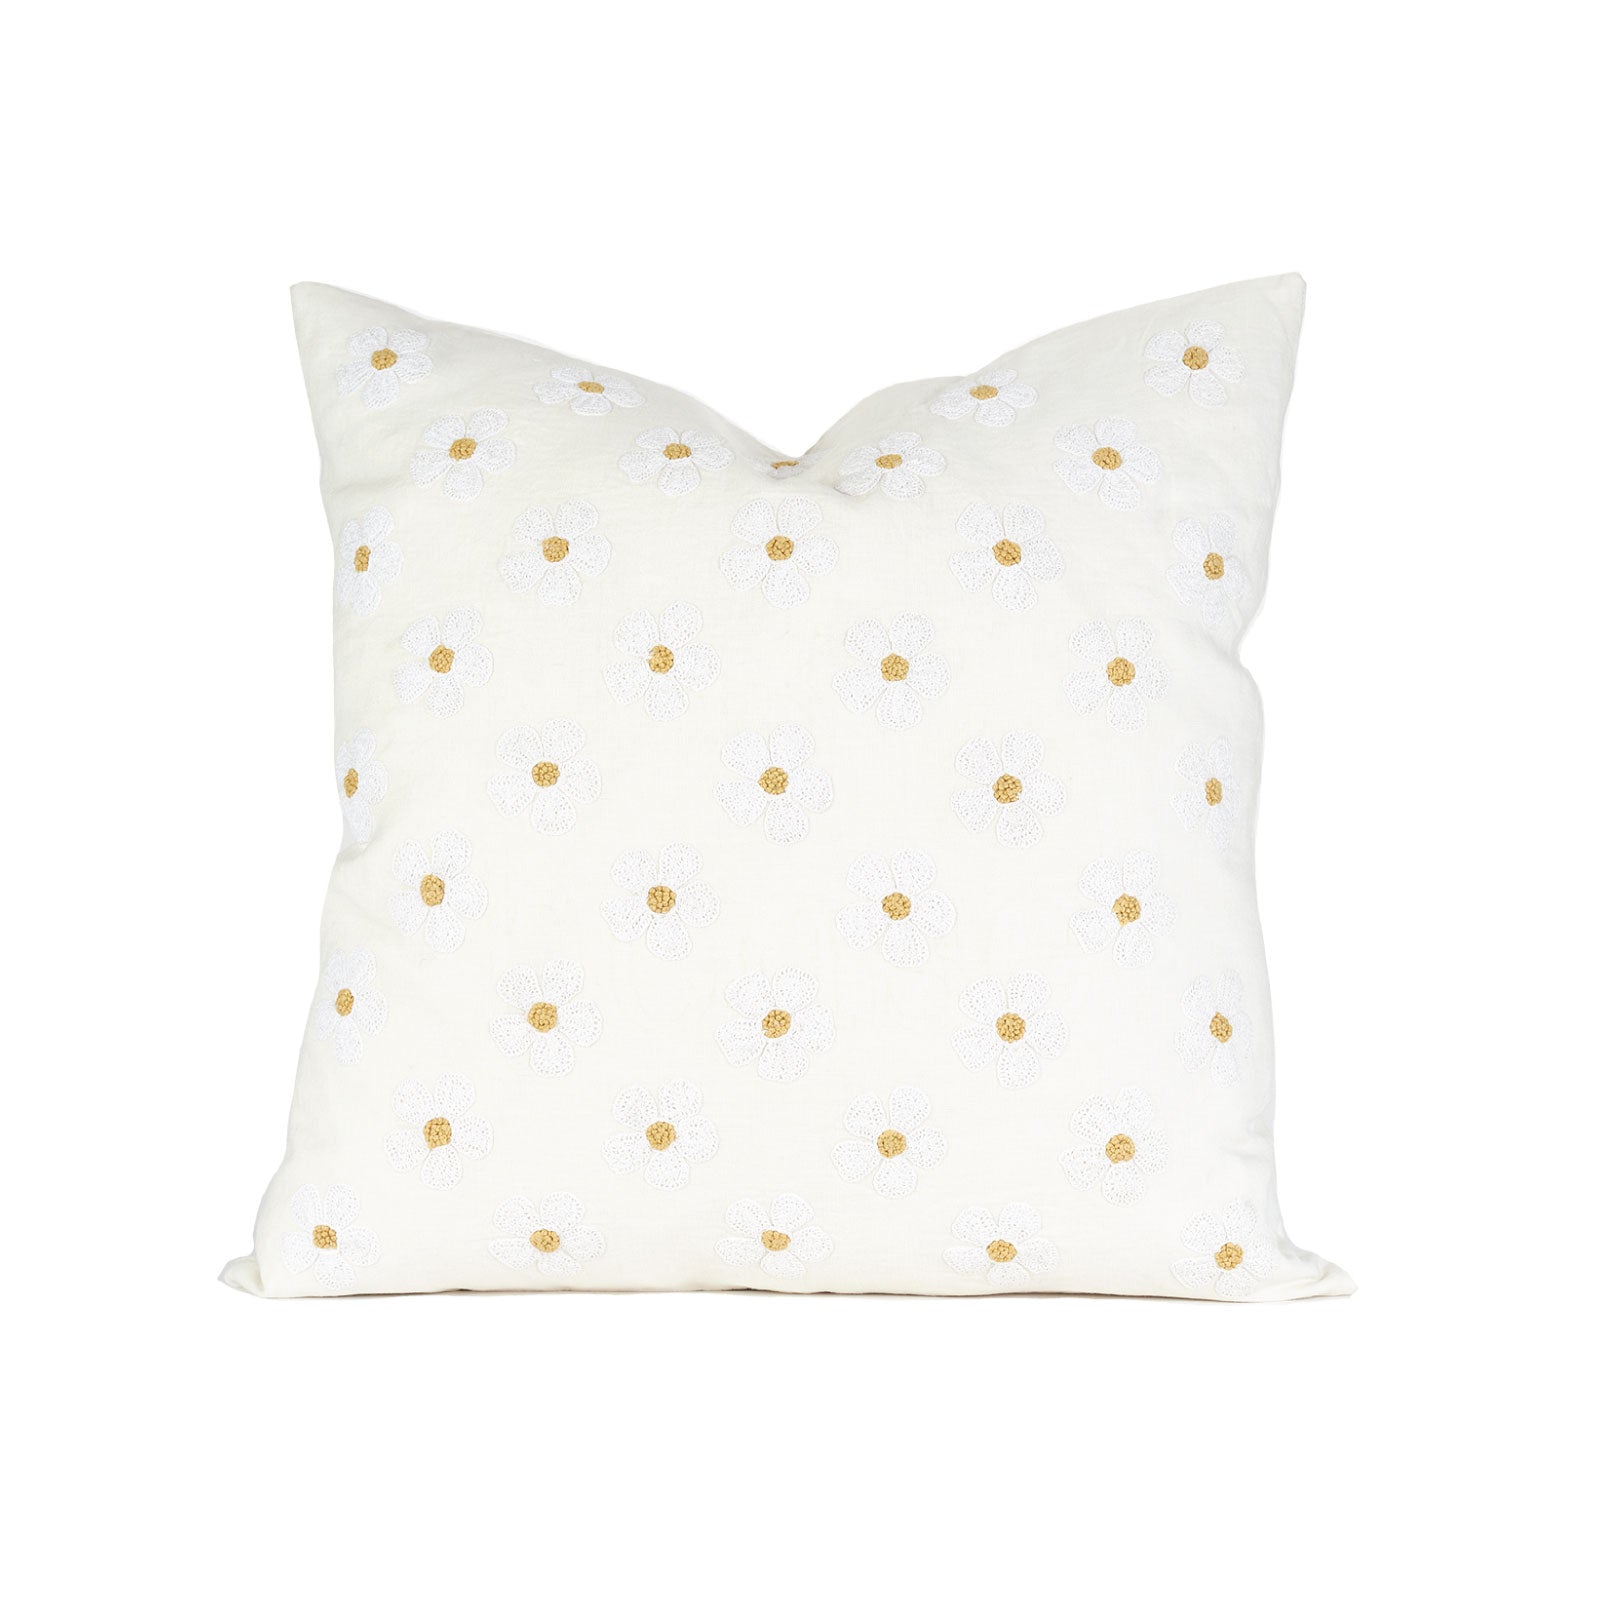 Daisy Embroidered Pillow